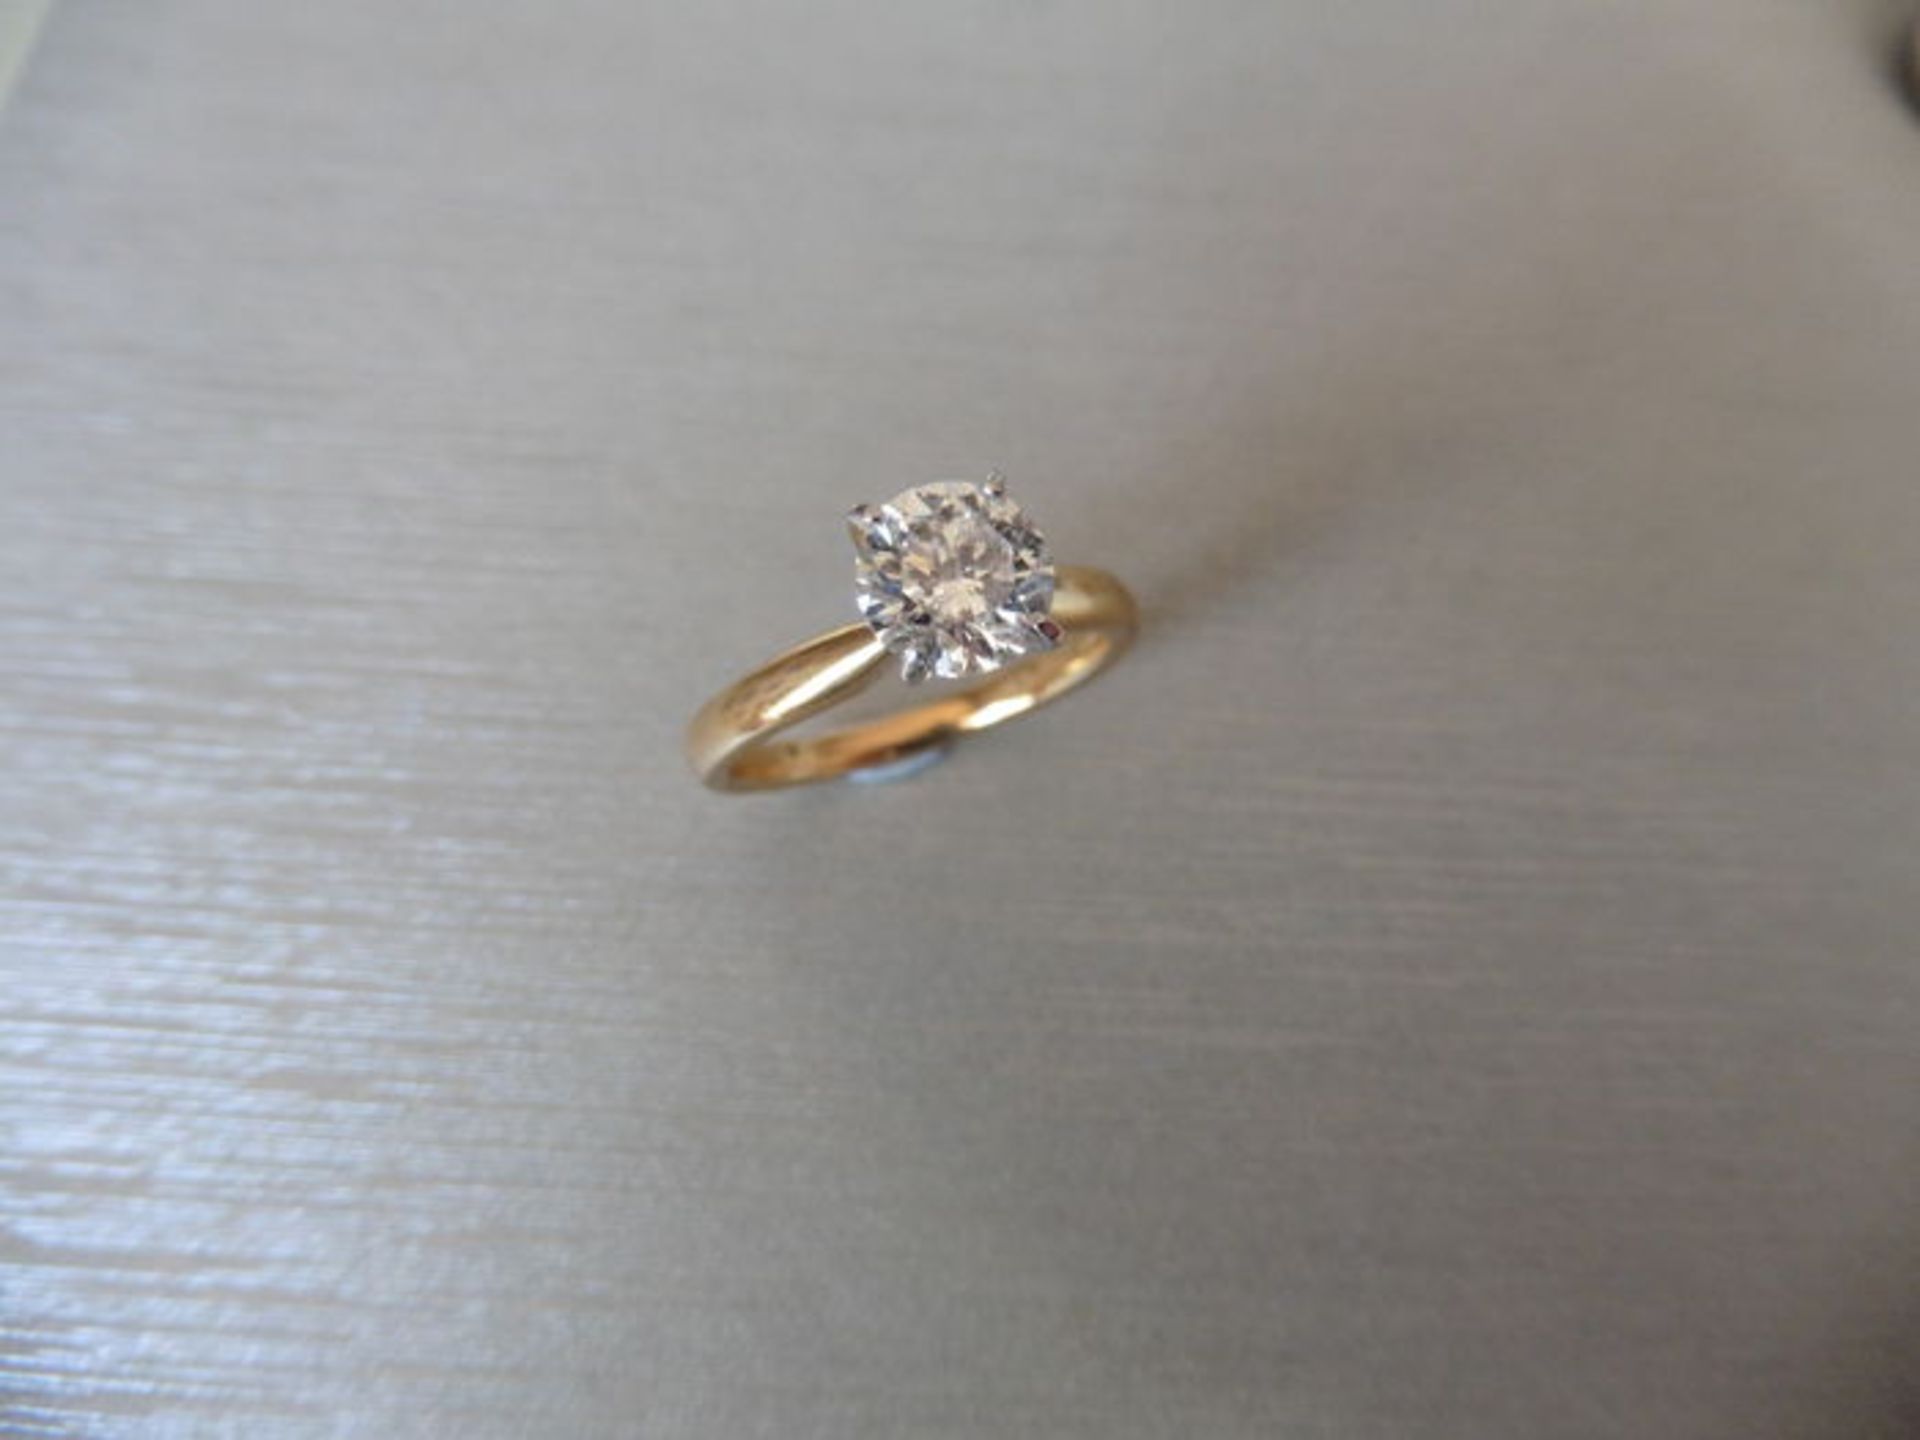 1.06ct diamond solitaire ring with a brilliant cut diamond. F colour and I1 clarity. Set in 18ct